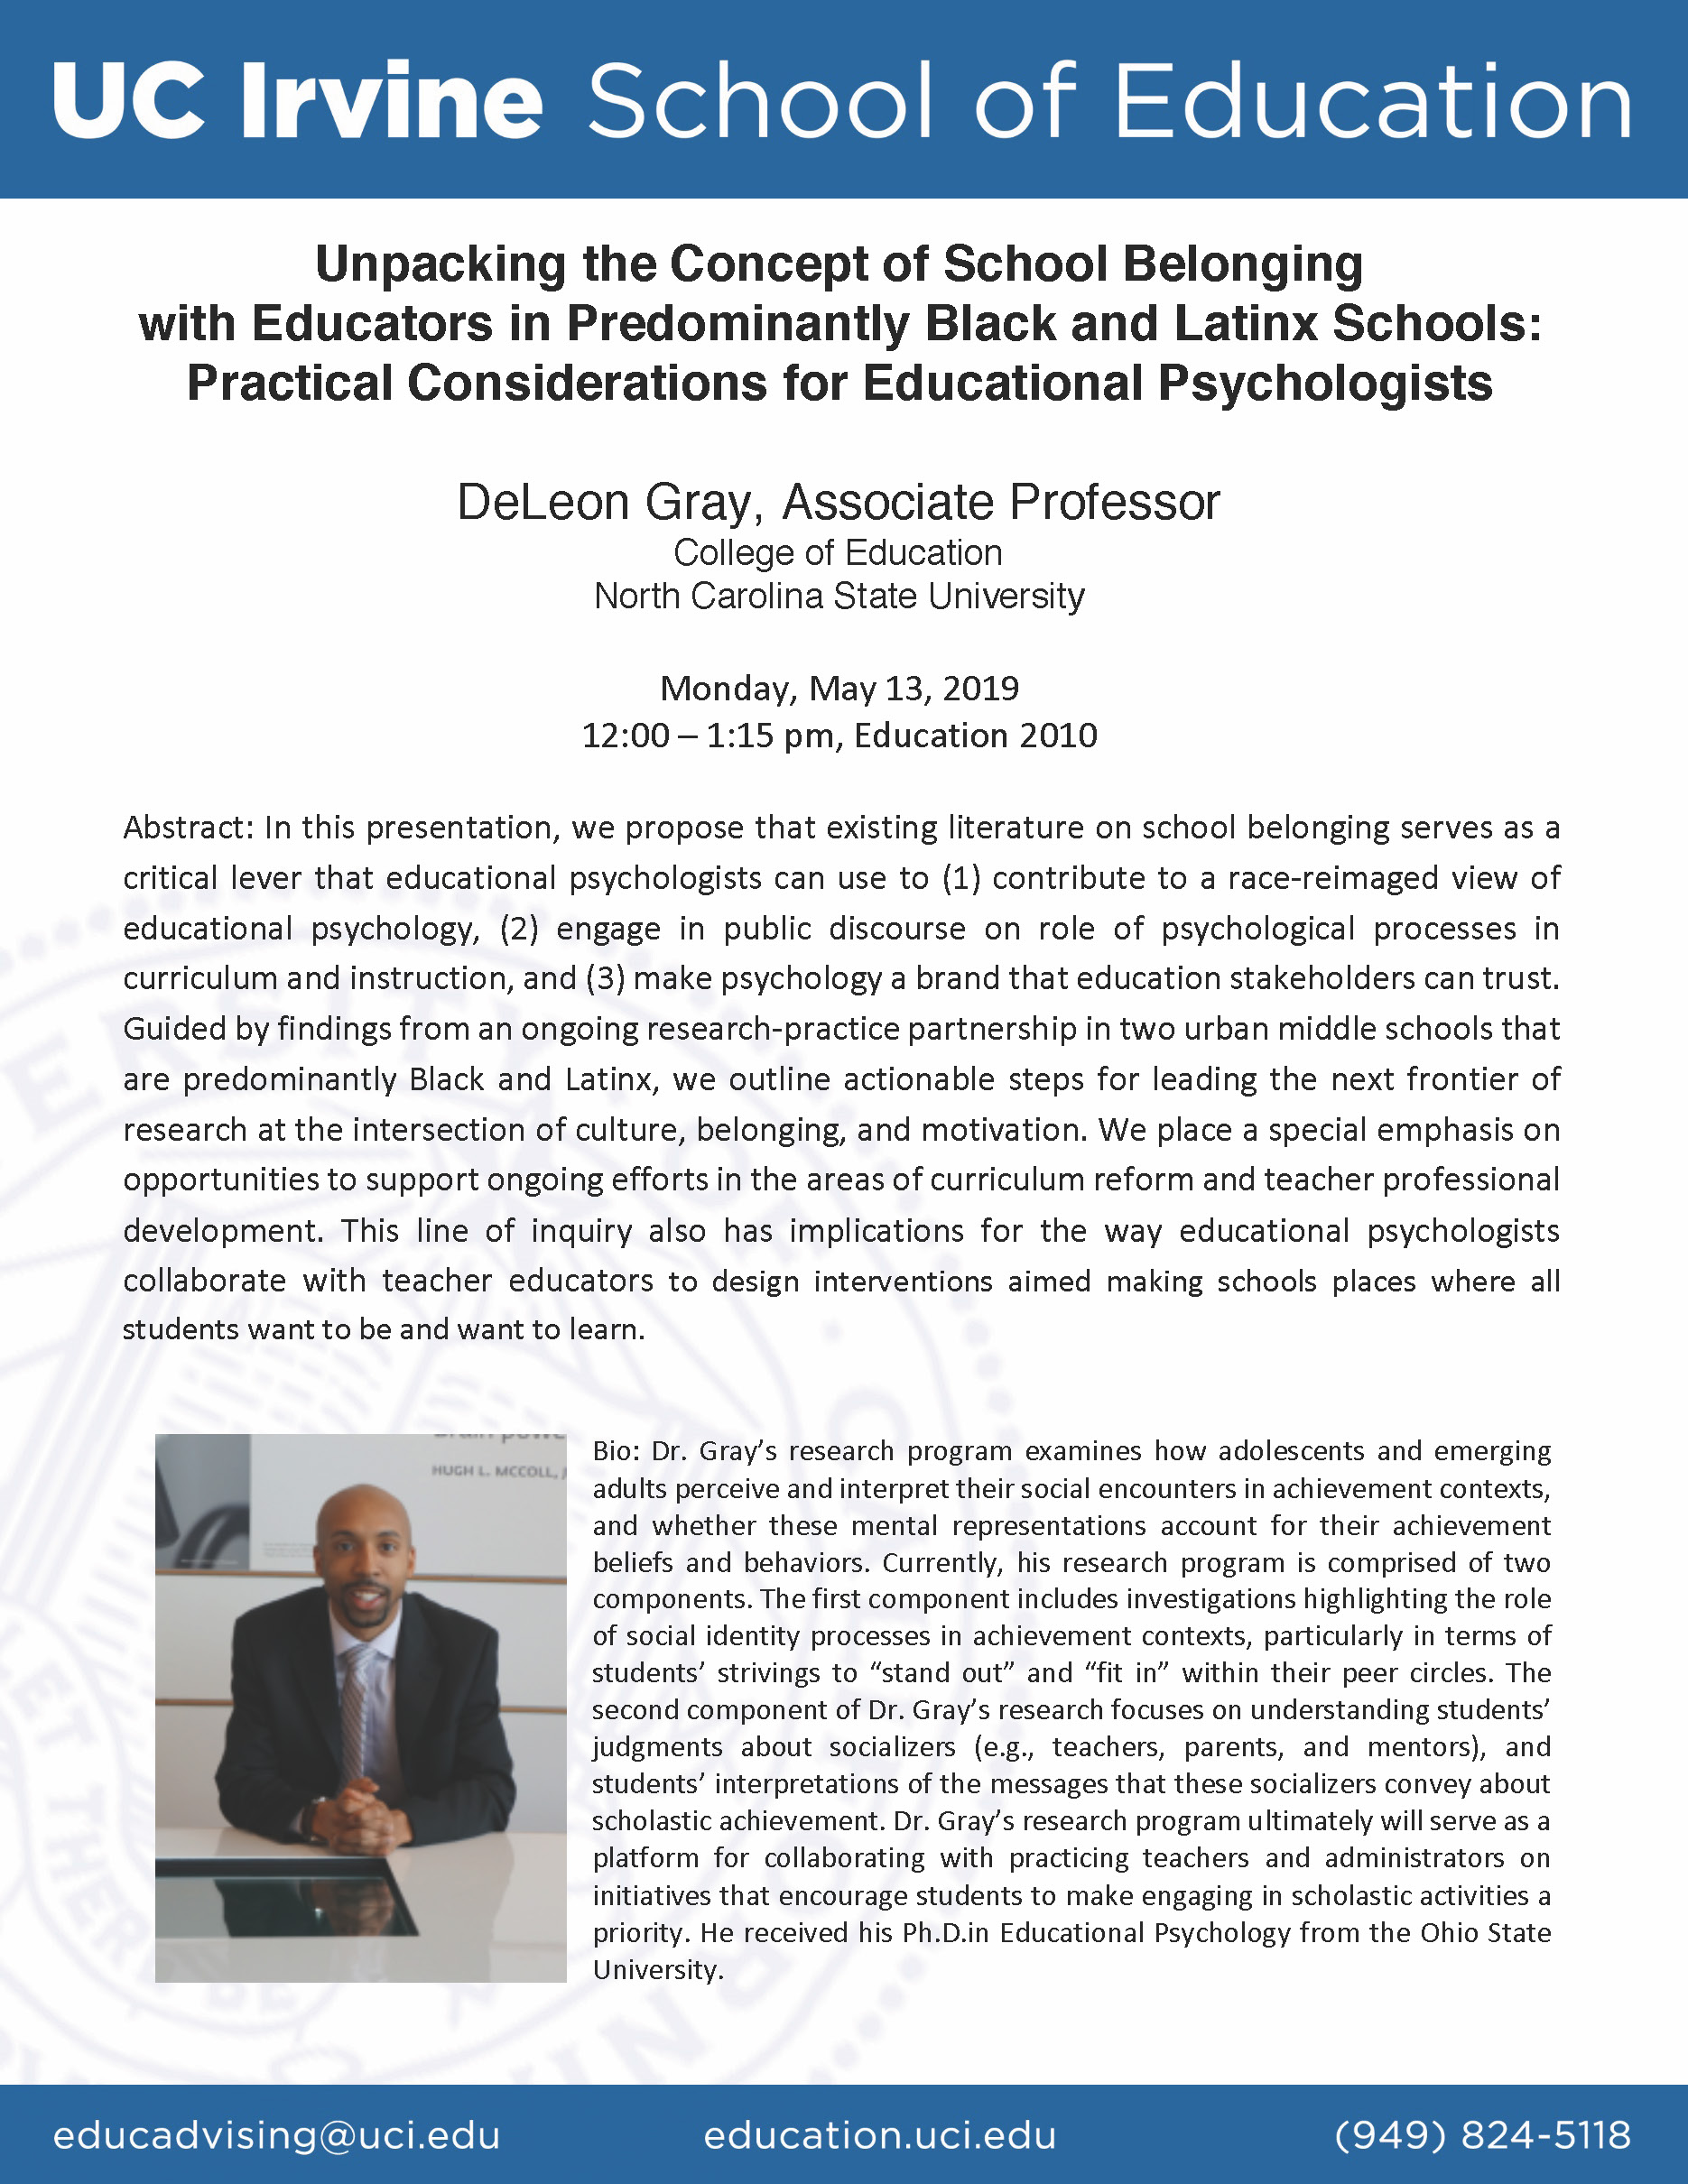 Unpacking the Concept of School Belonging with Educators in Predominantly Black and Latinx Schools: Practical Considerations for Educational Psychologists